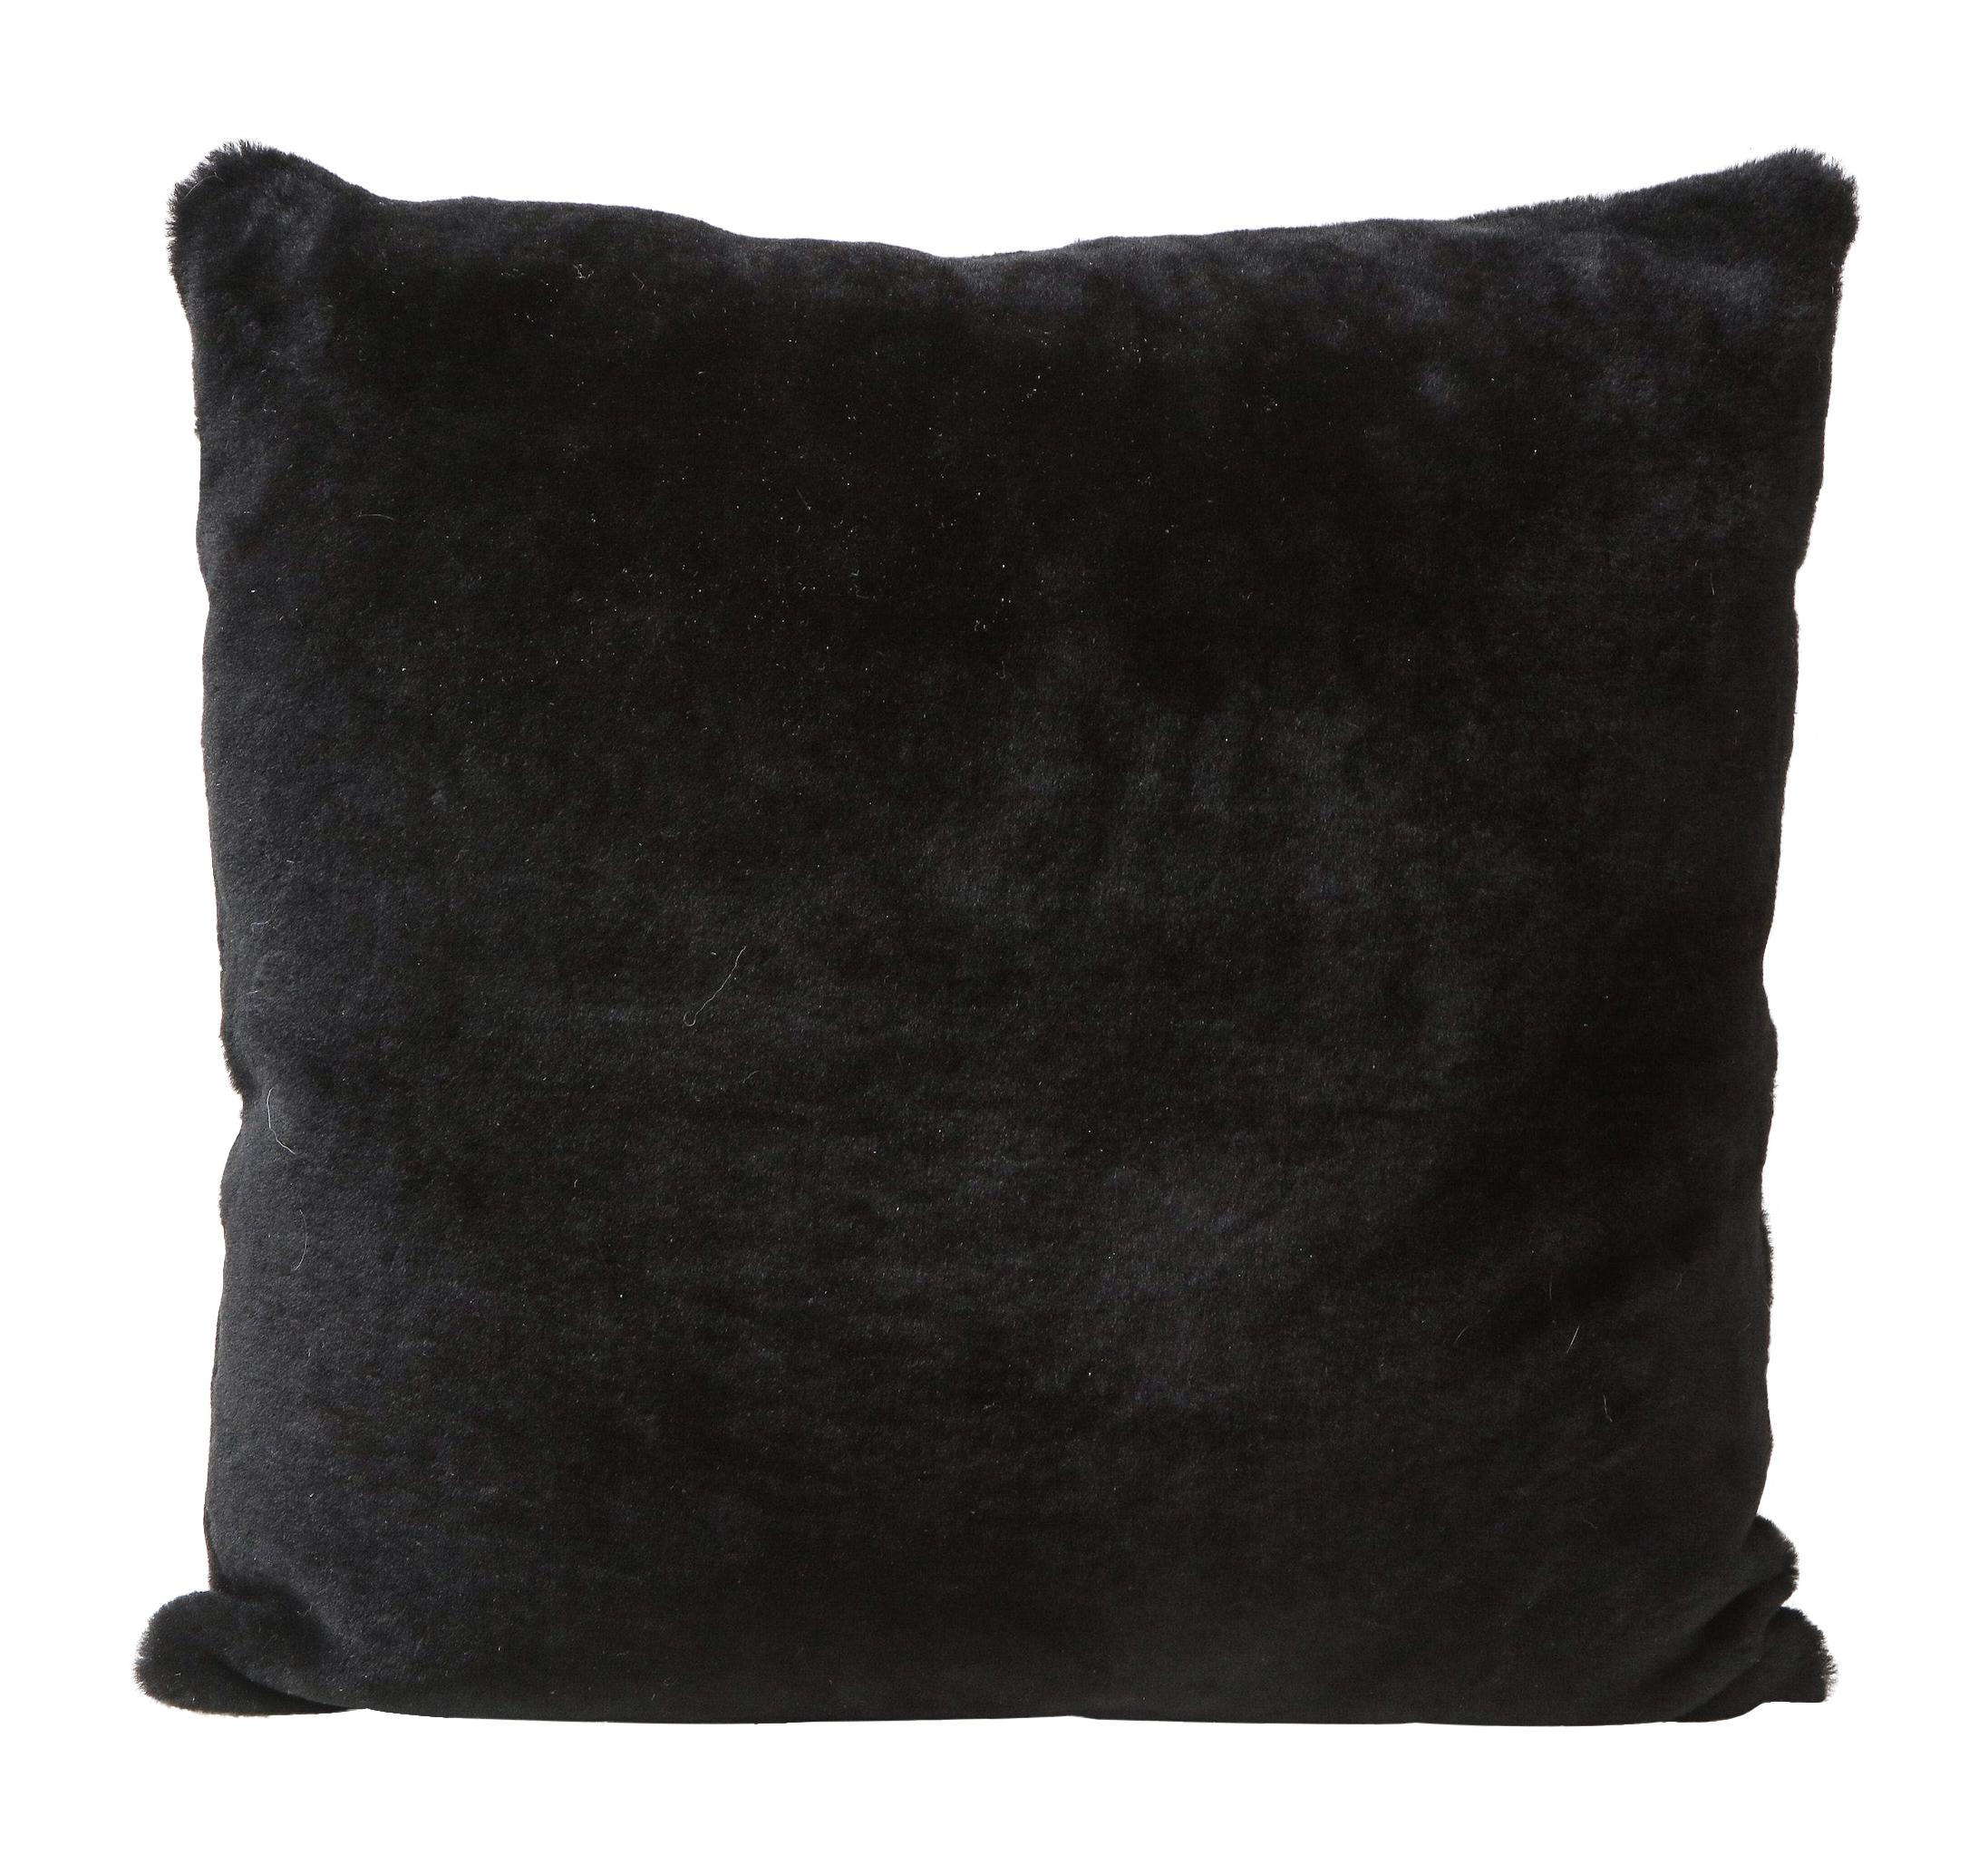 Custom Double Sided Merino Shearling Pillow in Black Color For Sale